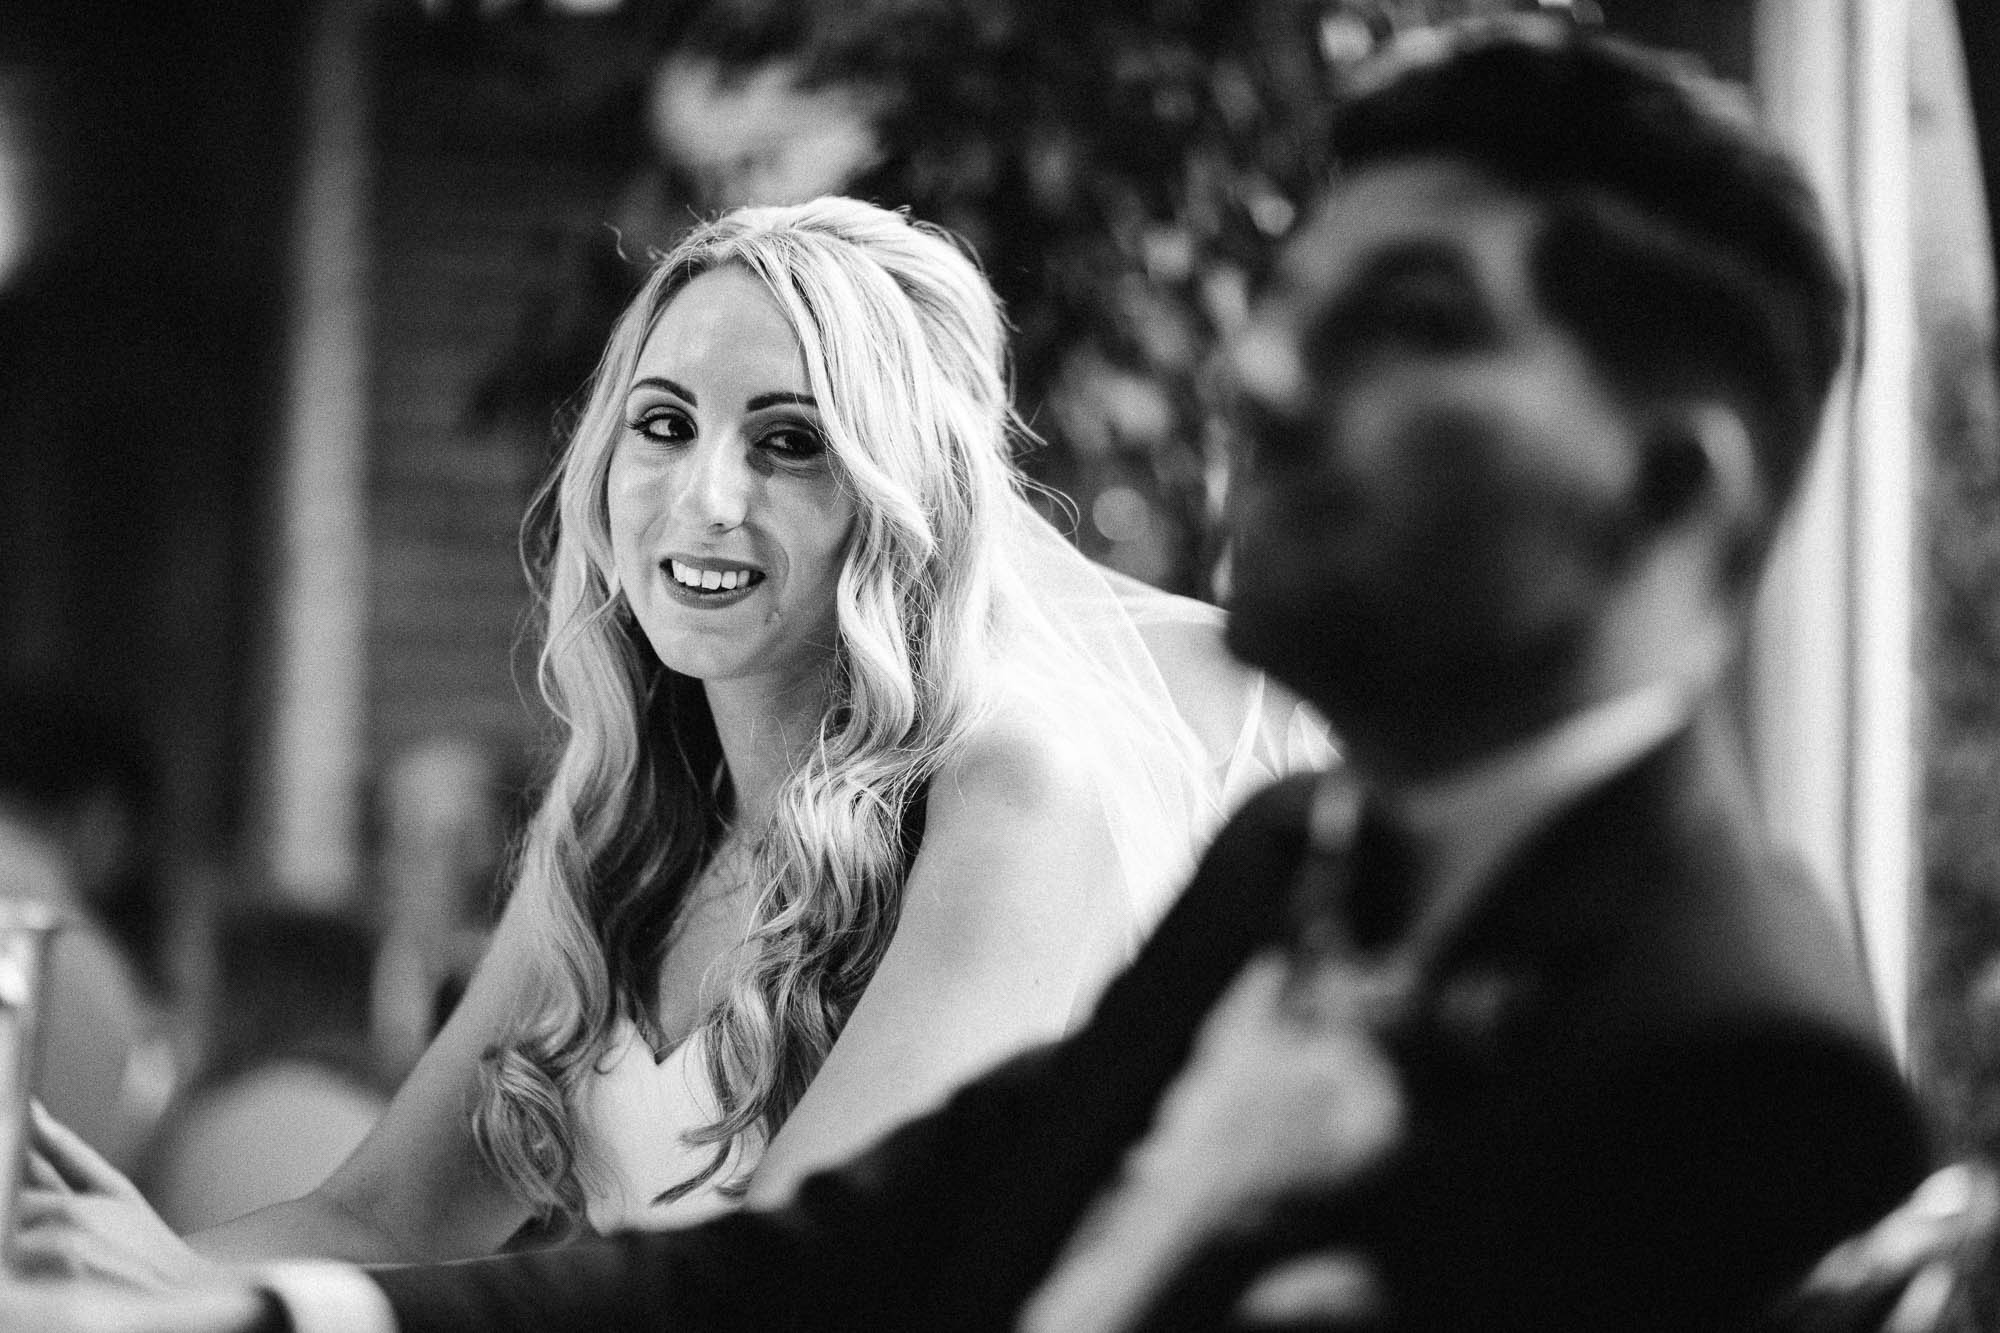 Bride looks over to Groom knowingly during a wedding speech joke